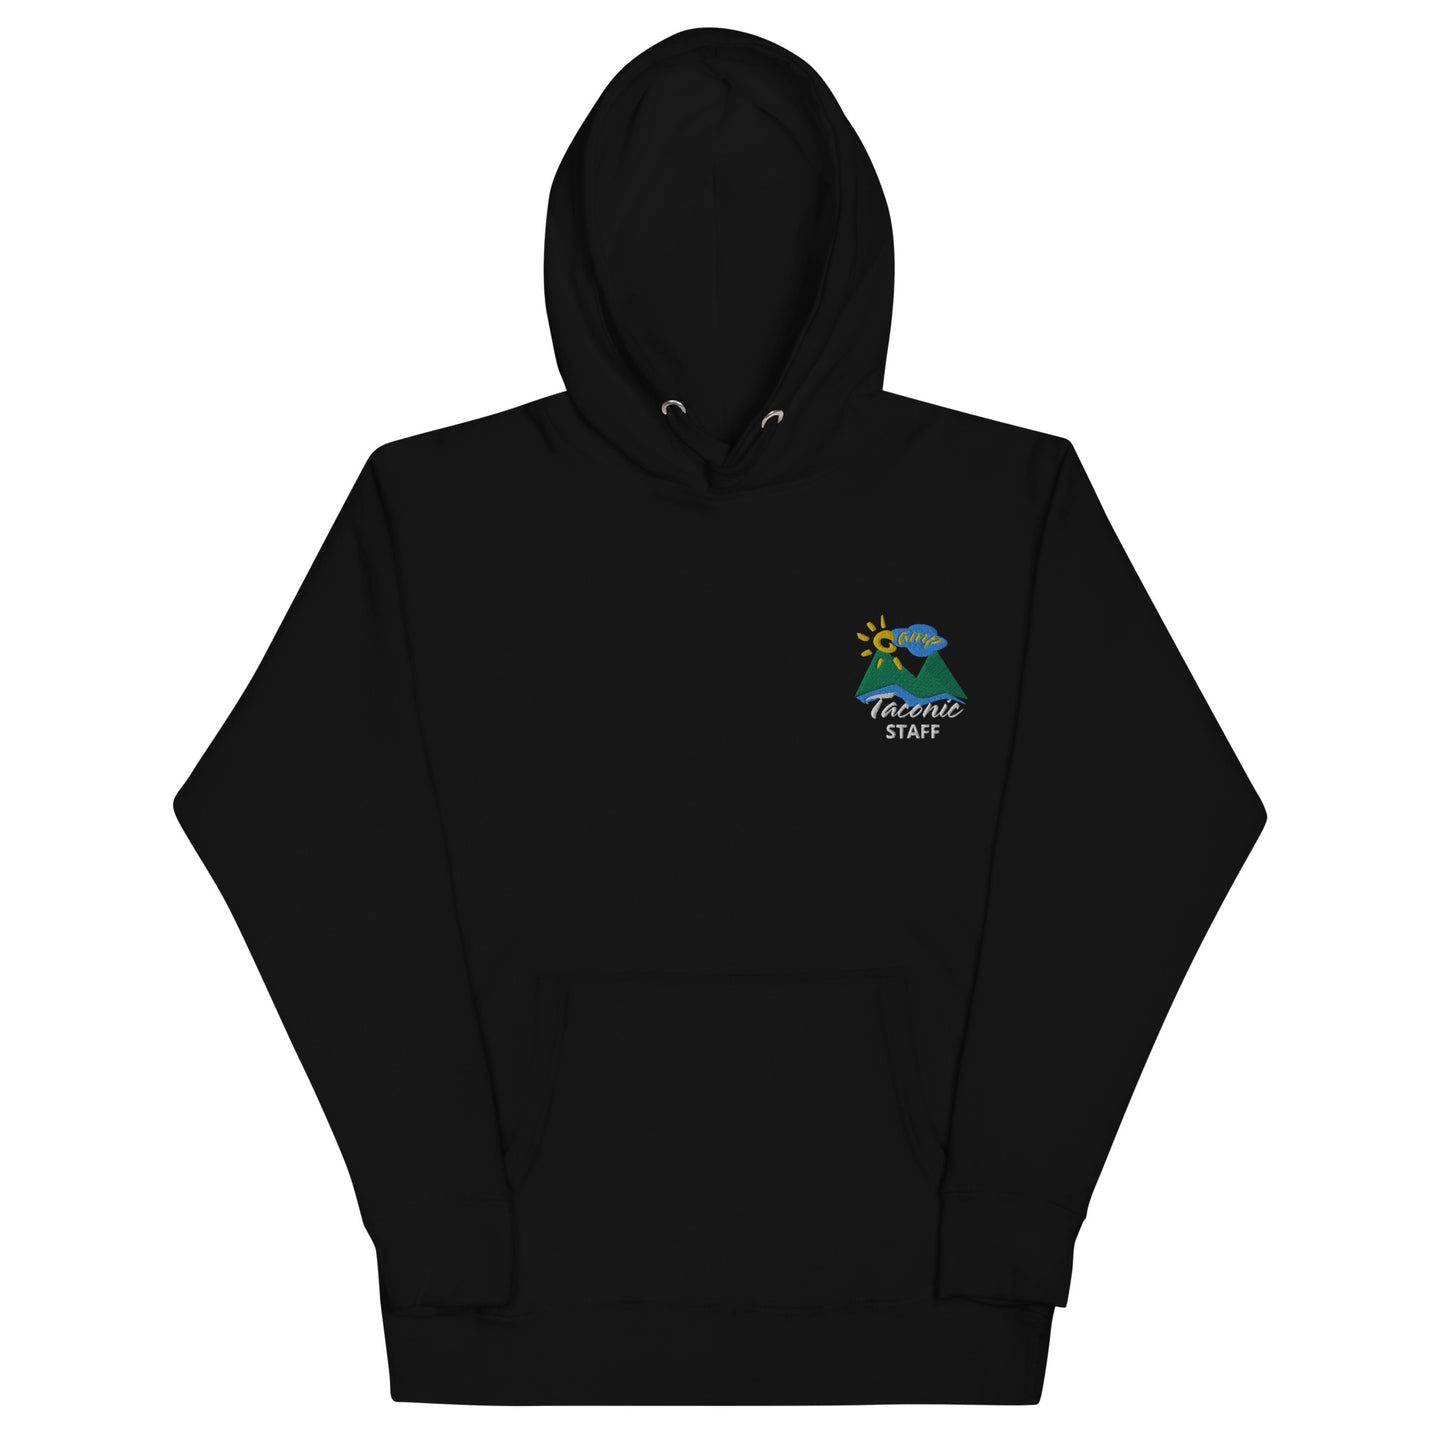 Camp Taconic Staff Embroidered Logo Unisex Hoodie